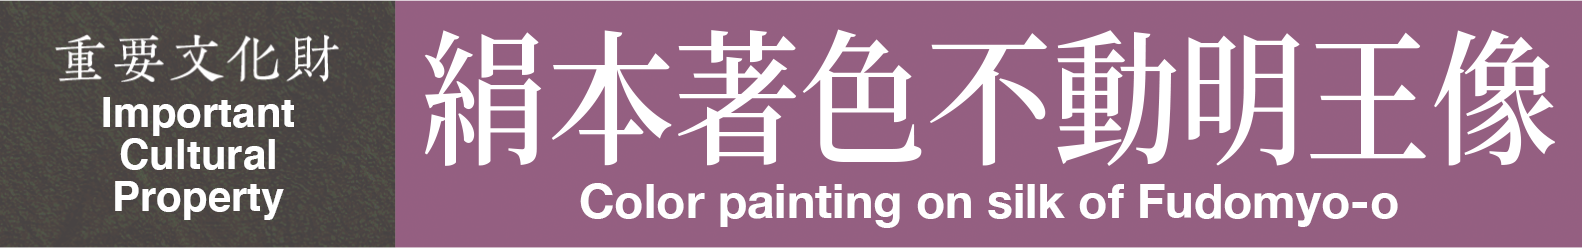 Important Cultural Property　Color painting on silk of Fudomyo-o